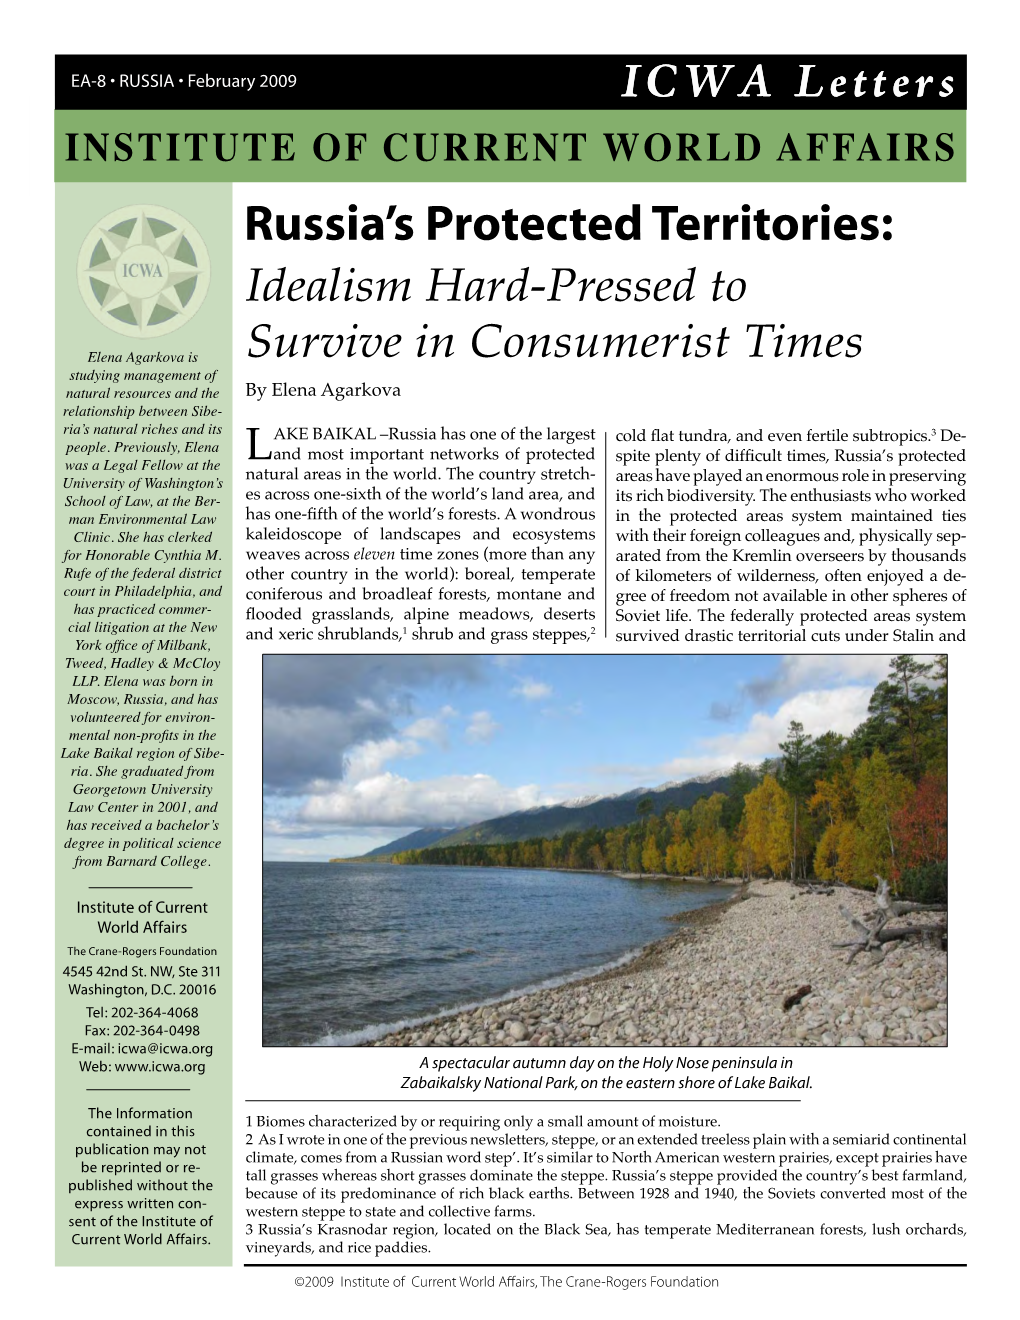 Russia's Protected Territories